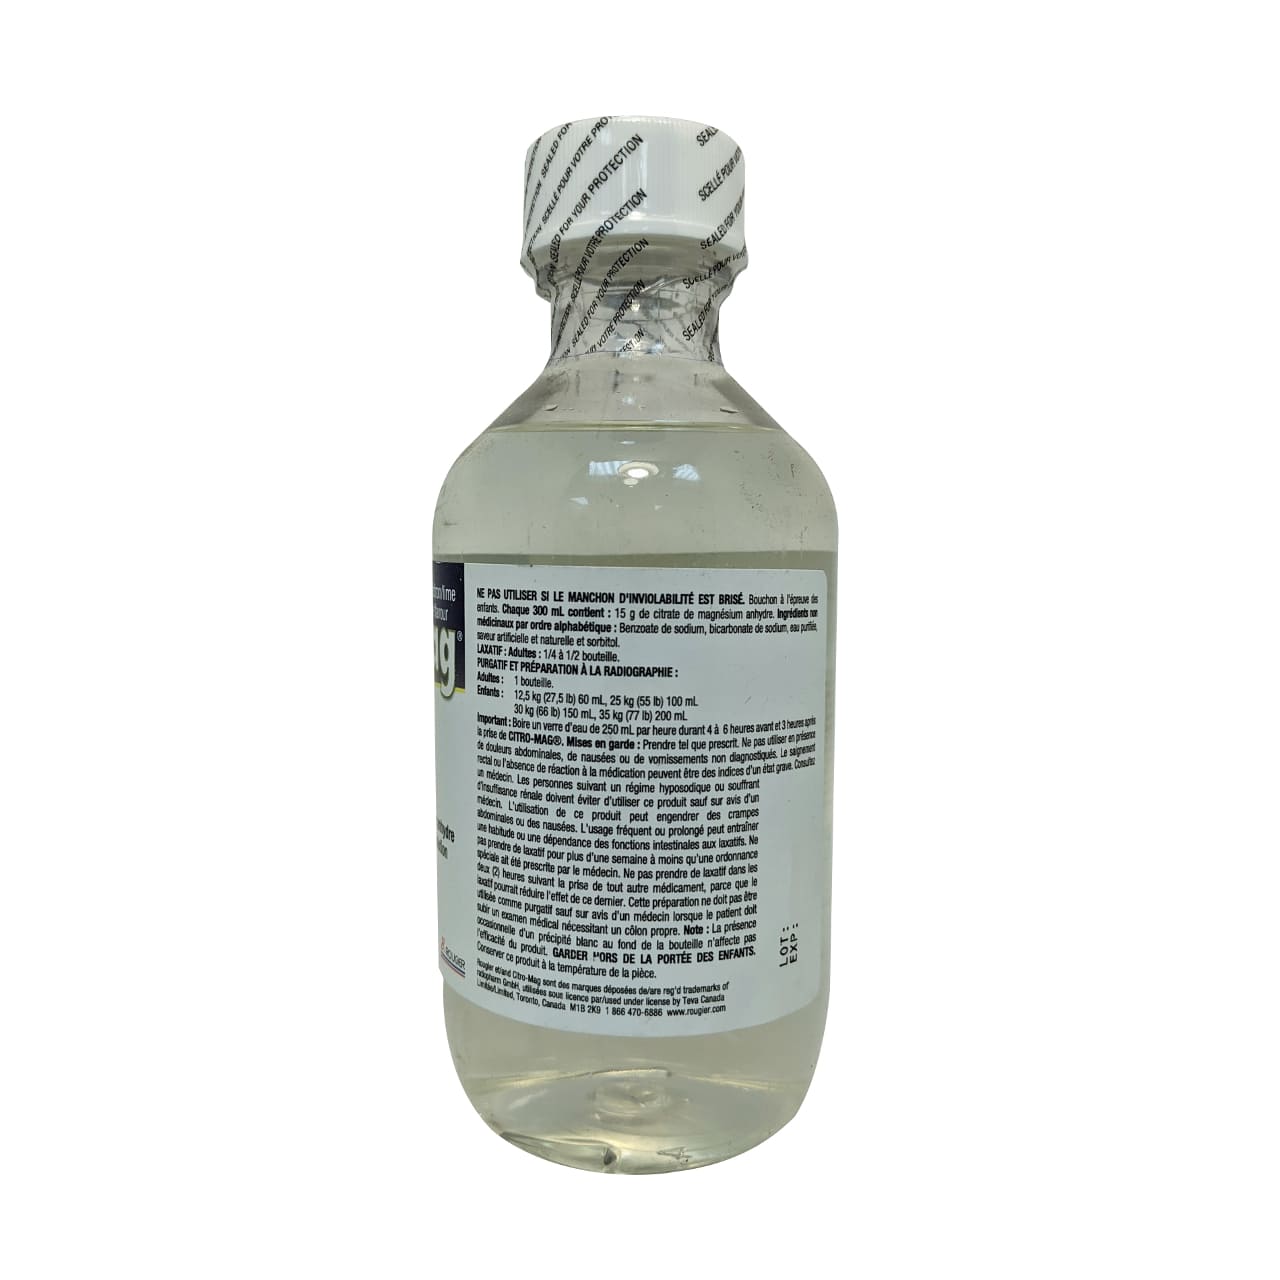 Dose, ingredients, and caution for Rougier Pharma Citro-Mag Laxative (300mL) Lemon Lime in French